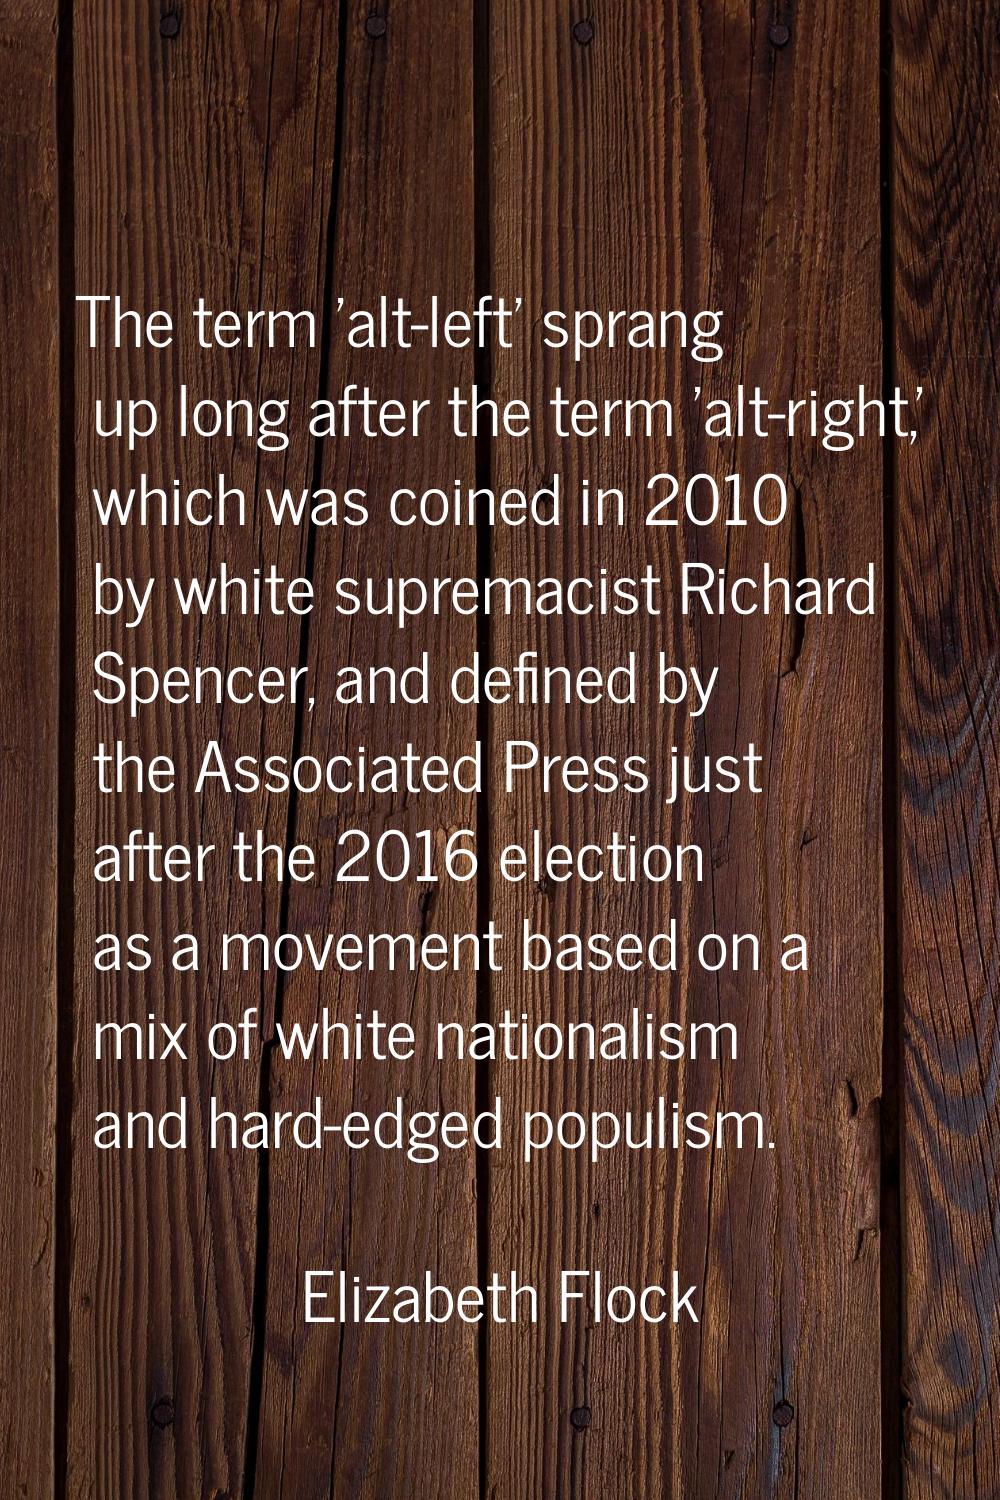 The term 'alt-left' sprang up long after the term 'alt-right,' which was coined in 2010 by white su